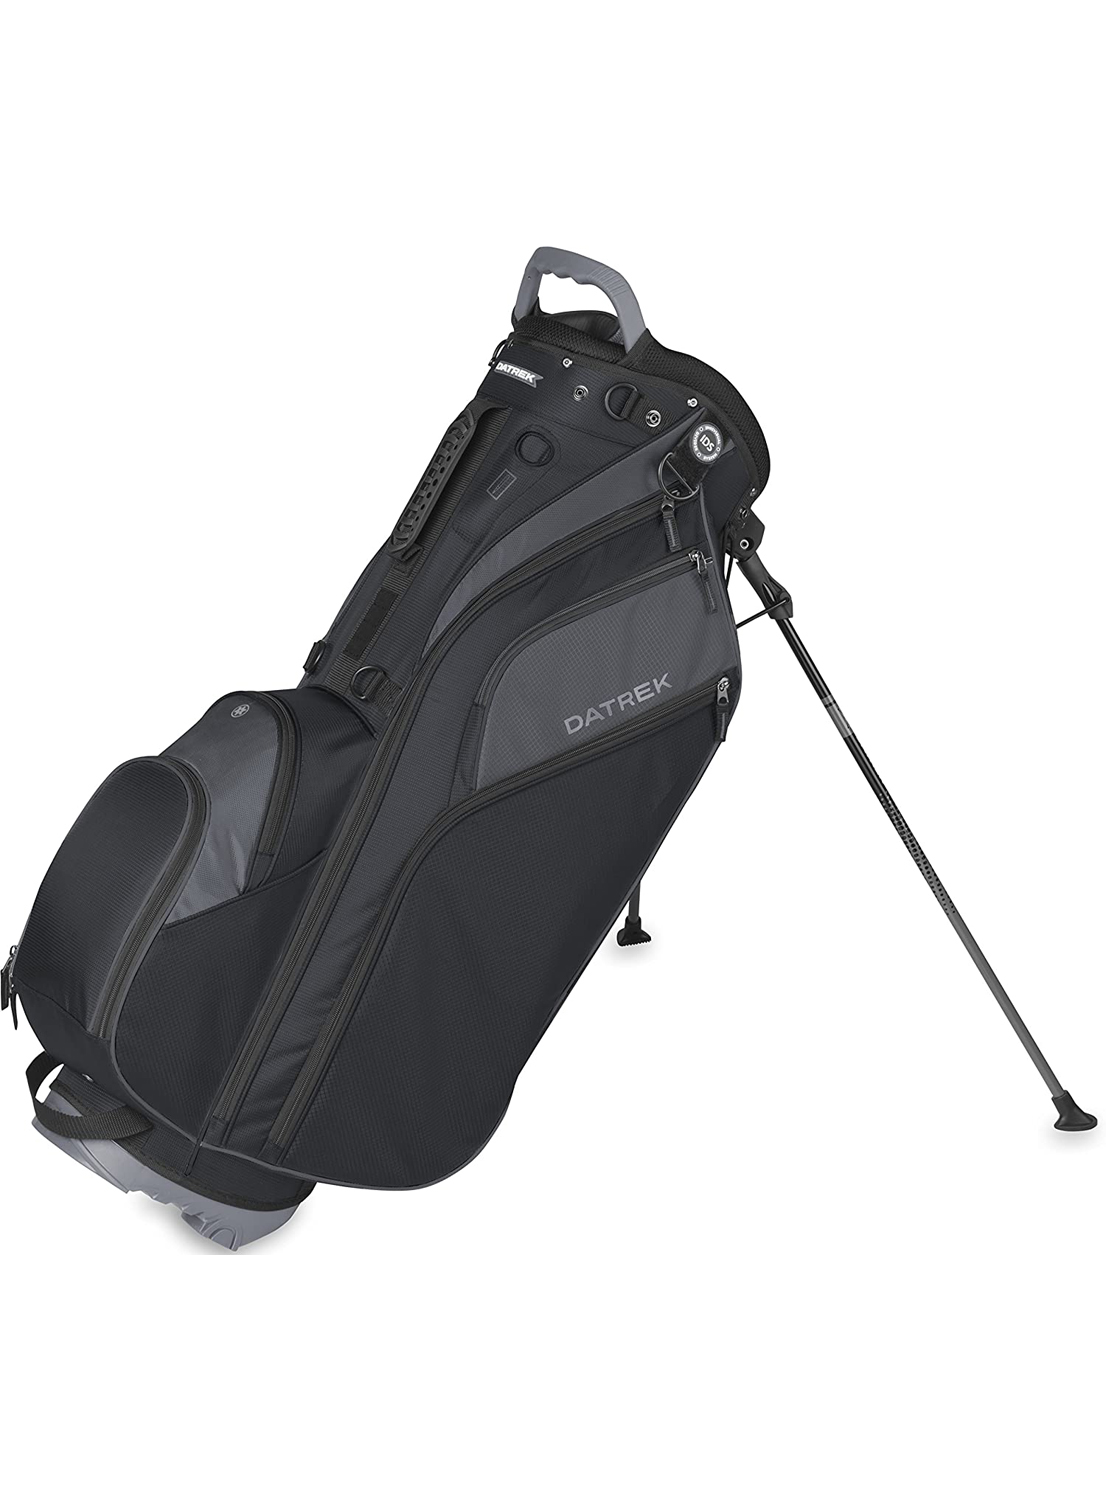 Best 14 Way Golf Stand Bag 2021 - (MUST READ Before You Buy)